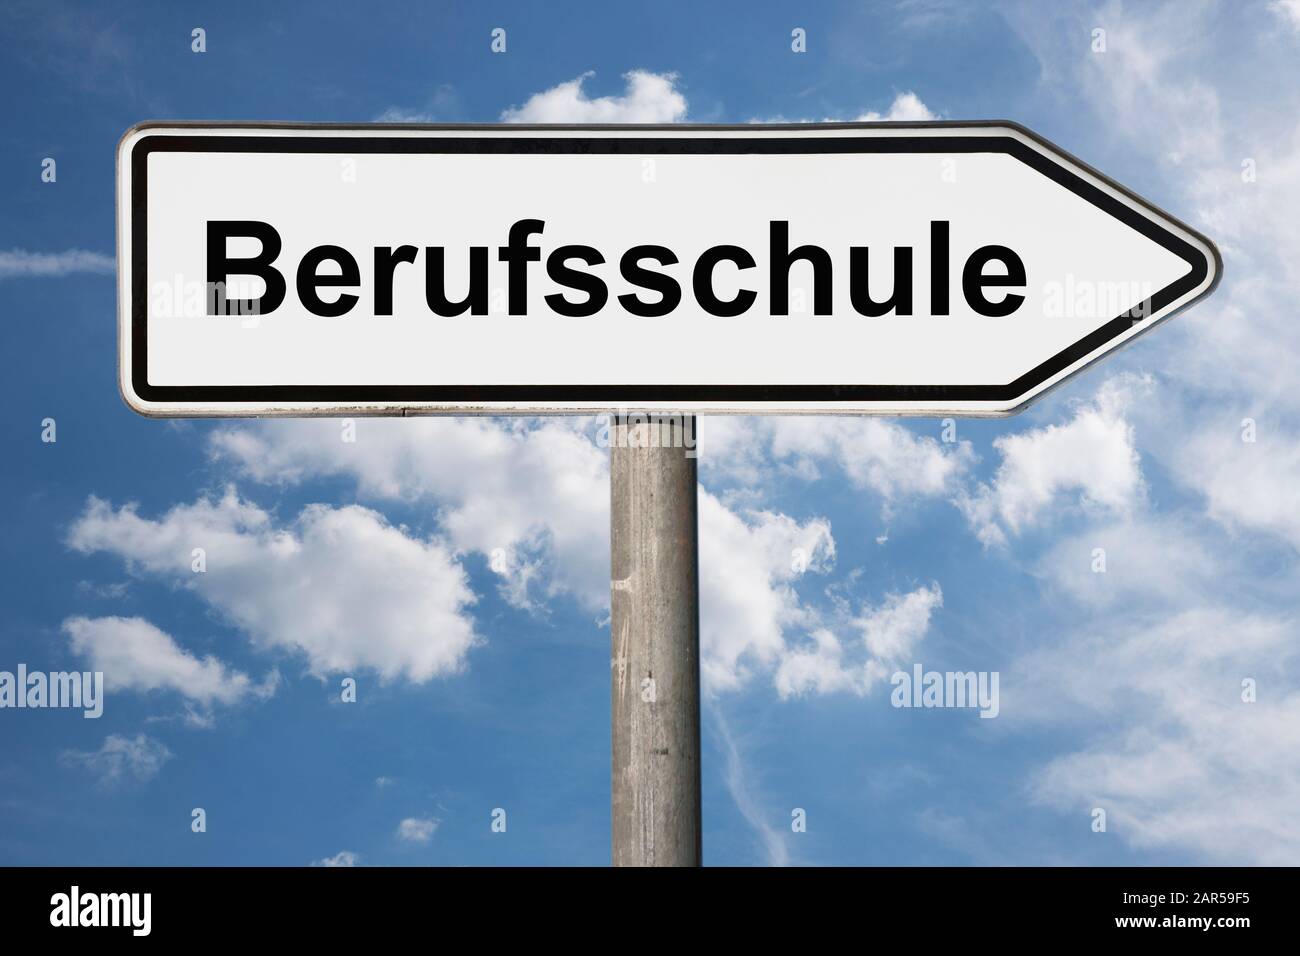 Detail photo of a signpost with the inscription Berufsschule (vocational training school) Stock Photo